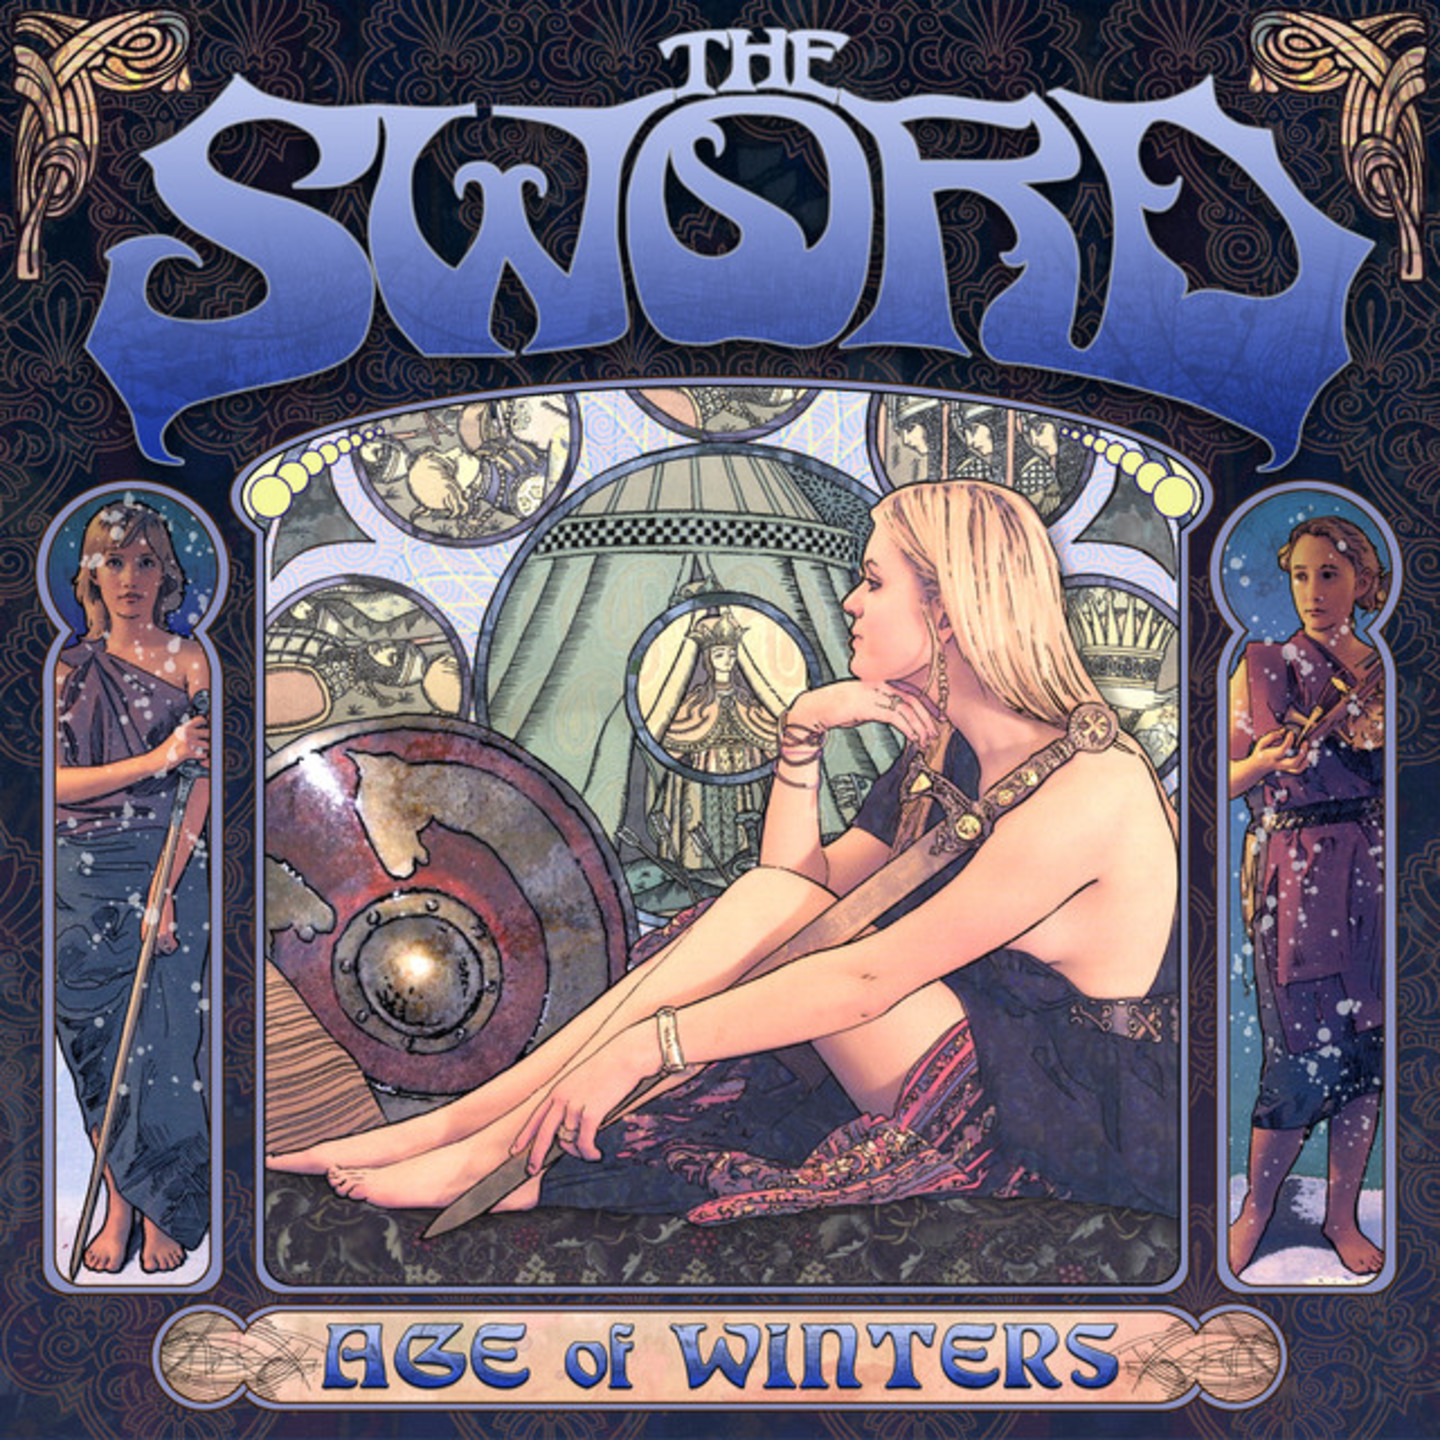 SWORD, THE - Age Of Winters LP